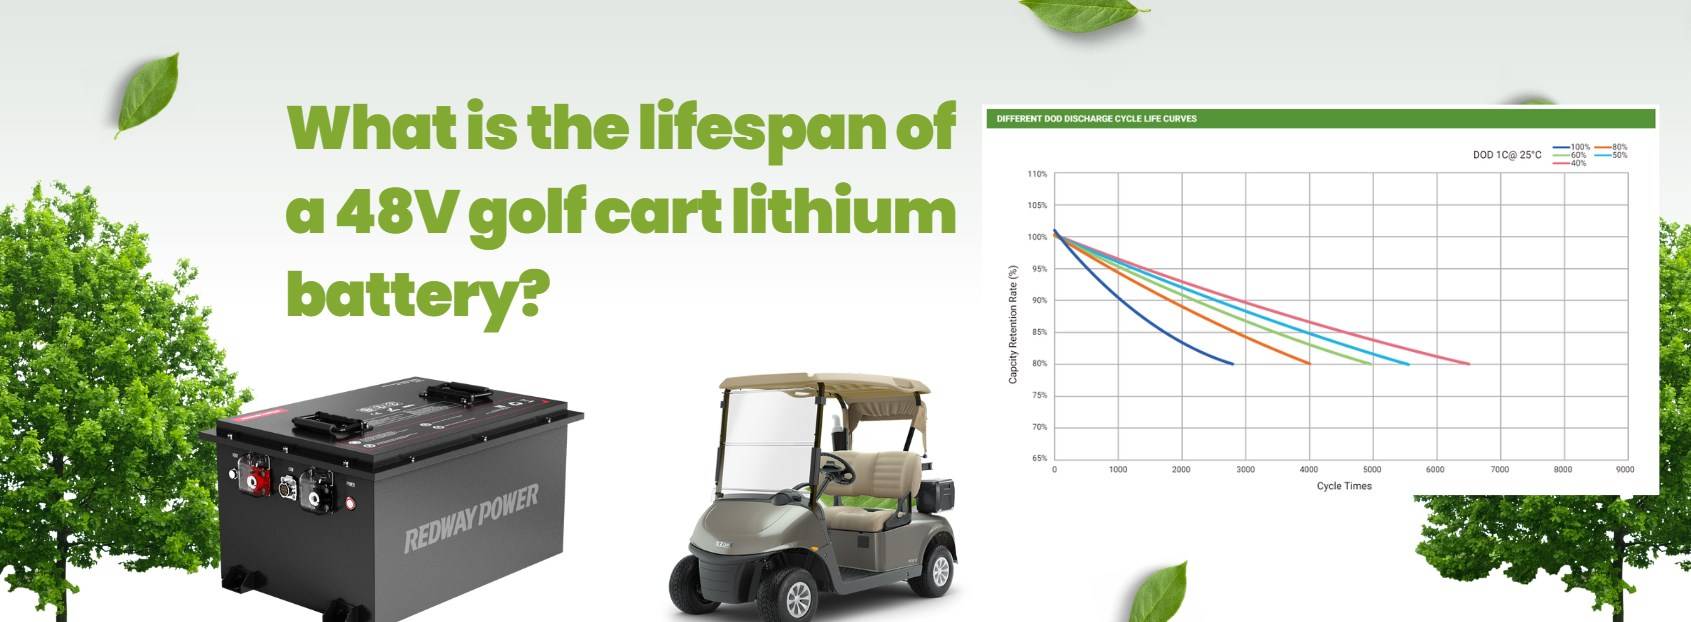 What is the lifespan of a 48V golf cart lithium battery? 48v 100ah redway